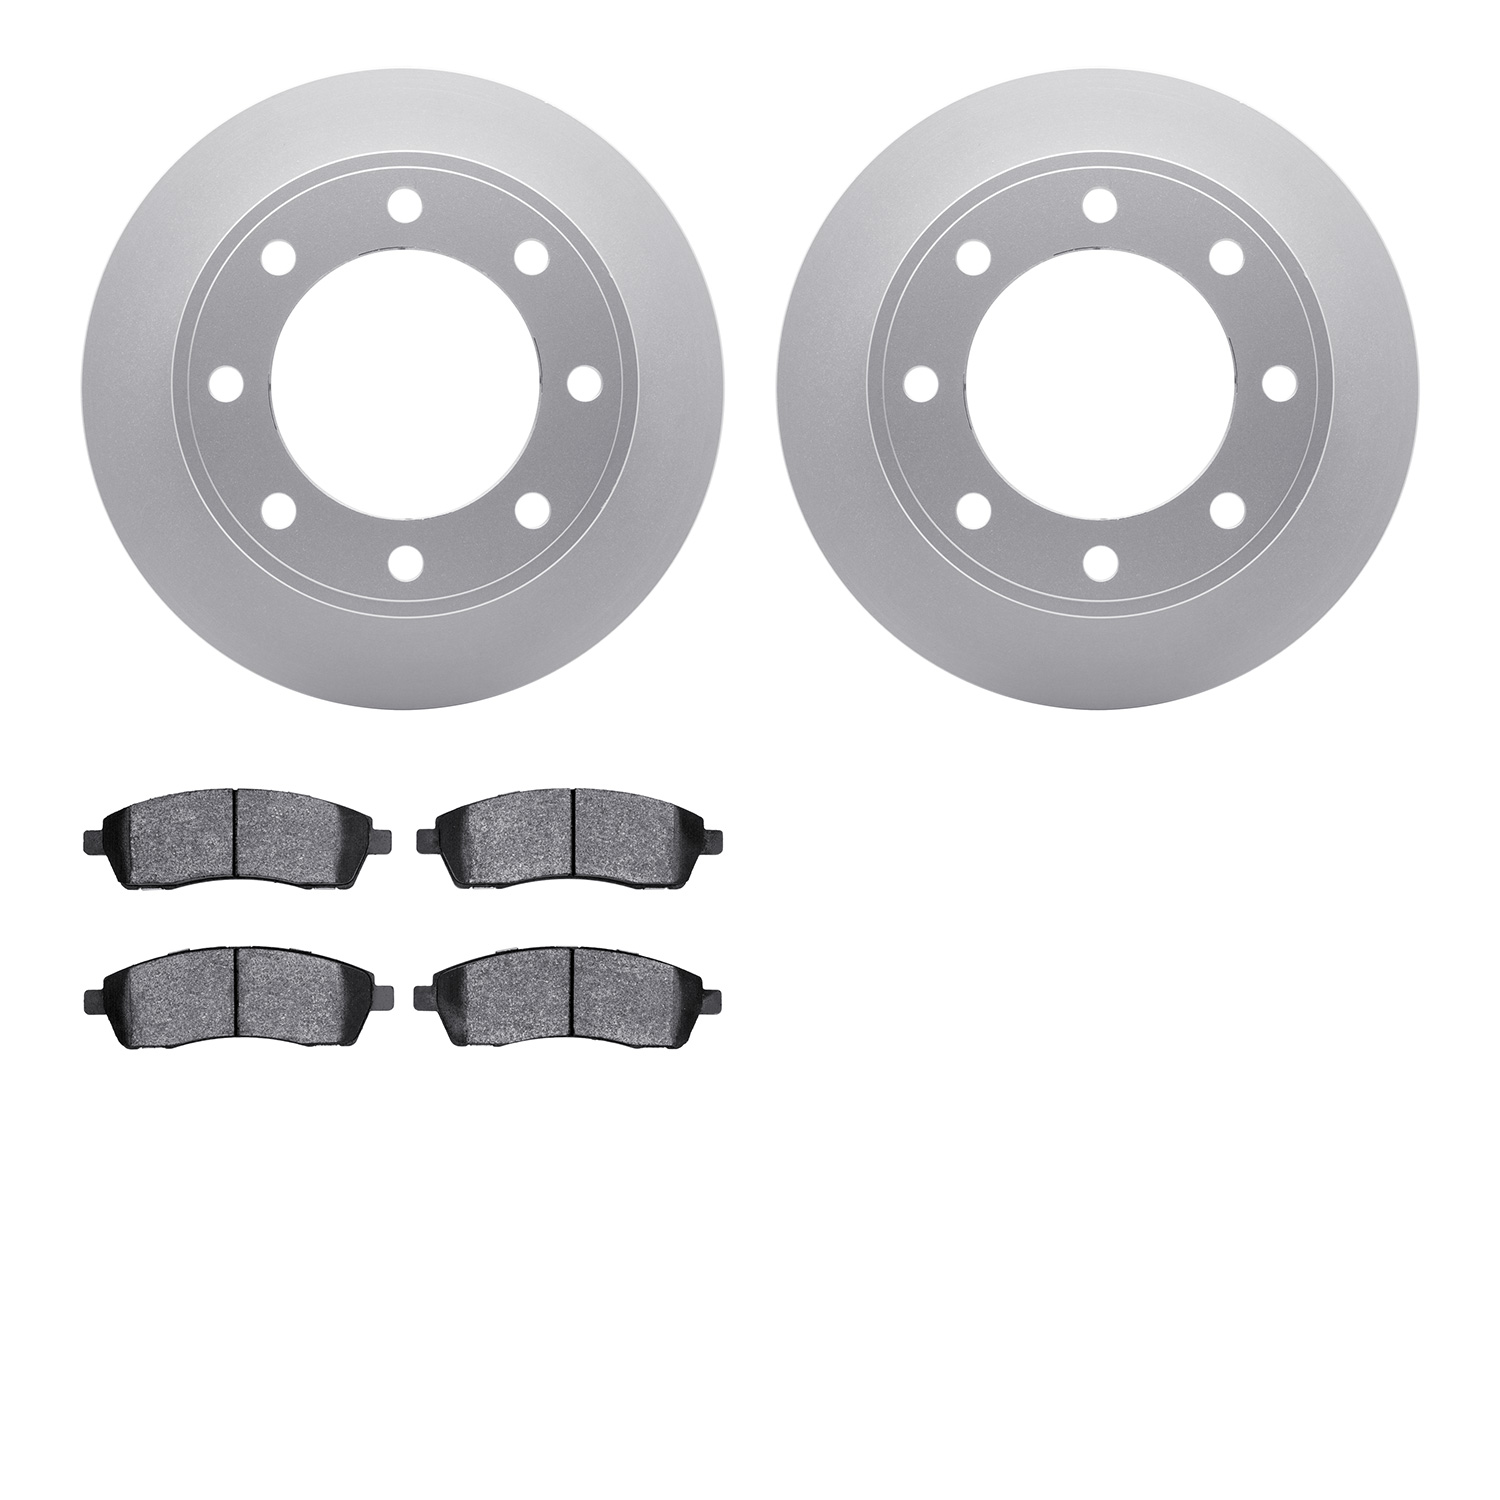 4402-54024 Geospec Brake Rotors with Ultimate-Duty Brake Pads Kit, 1999-2005 Ford/Lincoln/Mercury/Mazda, Position: Rear